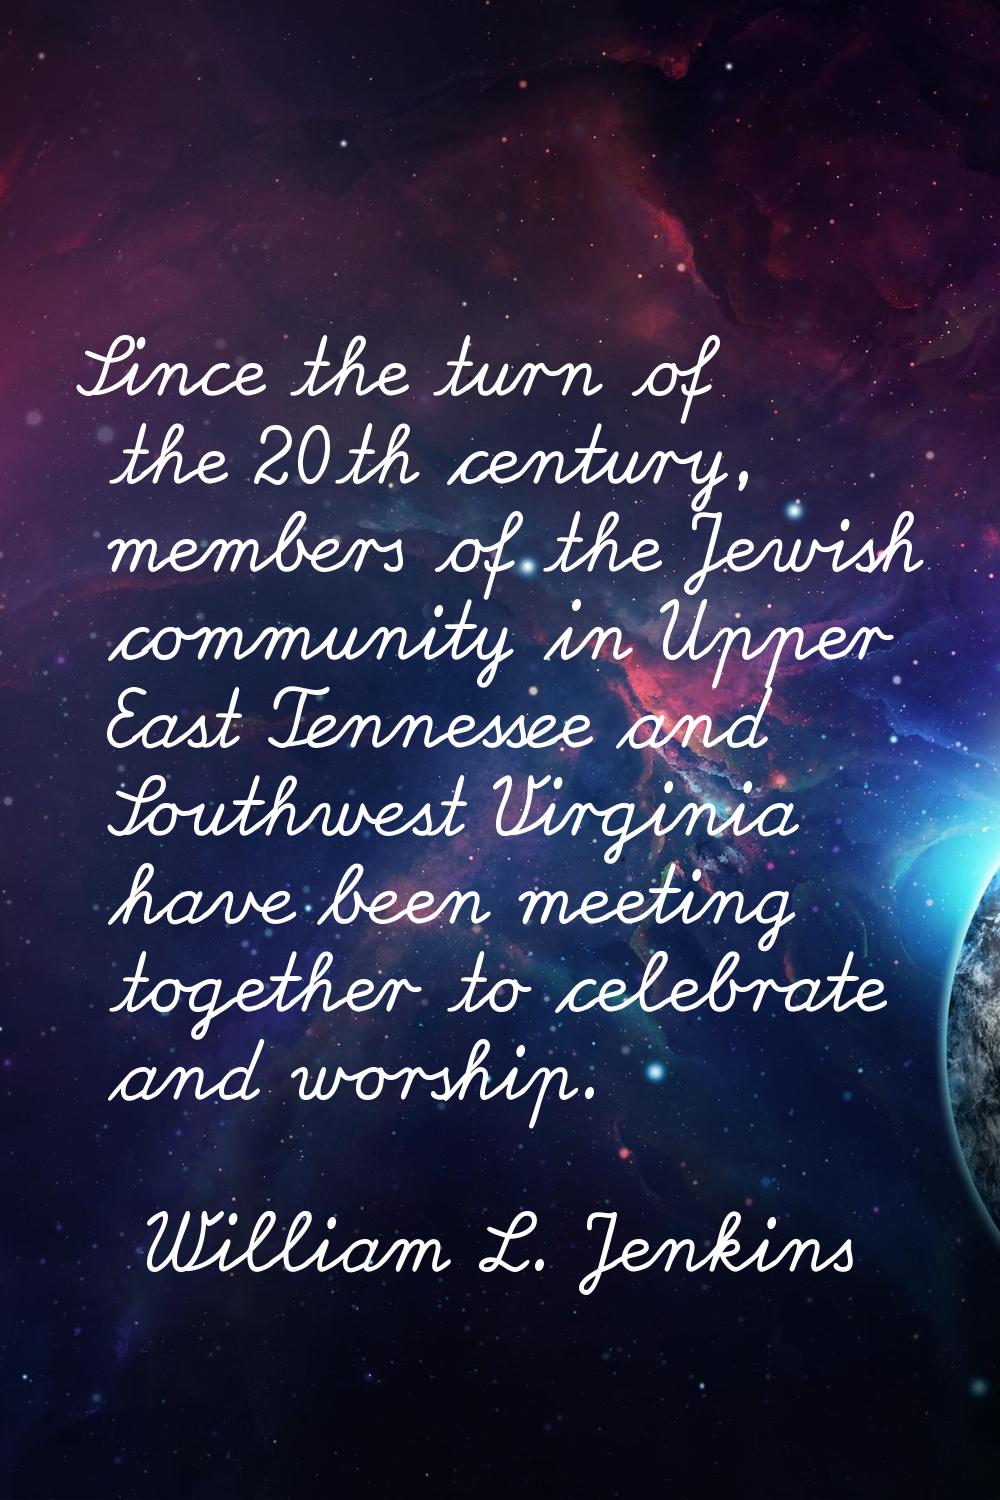 Since the turn of the 20th century, members of the Jewish community in Upper East Tennessee and Sou